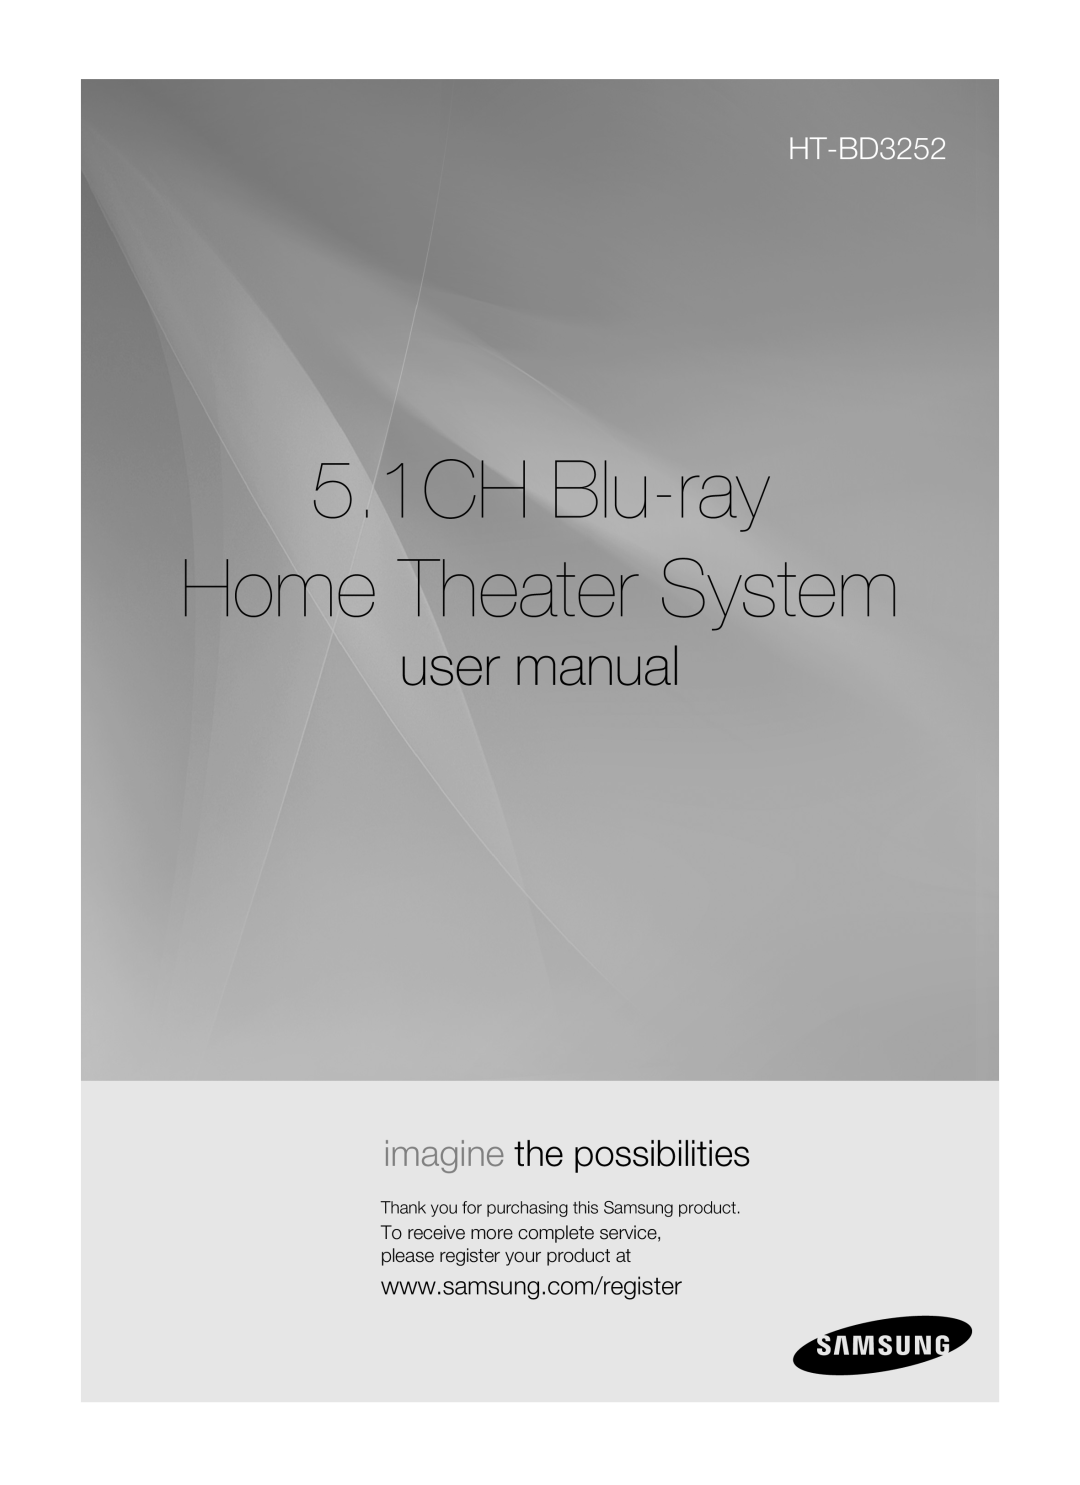 Samsung HT-BD3252 user manual 5.1CH Blu-ray Home Theater System, imagine the possibilities 